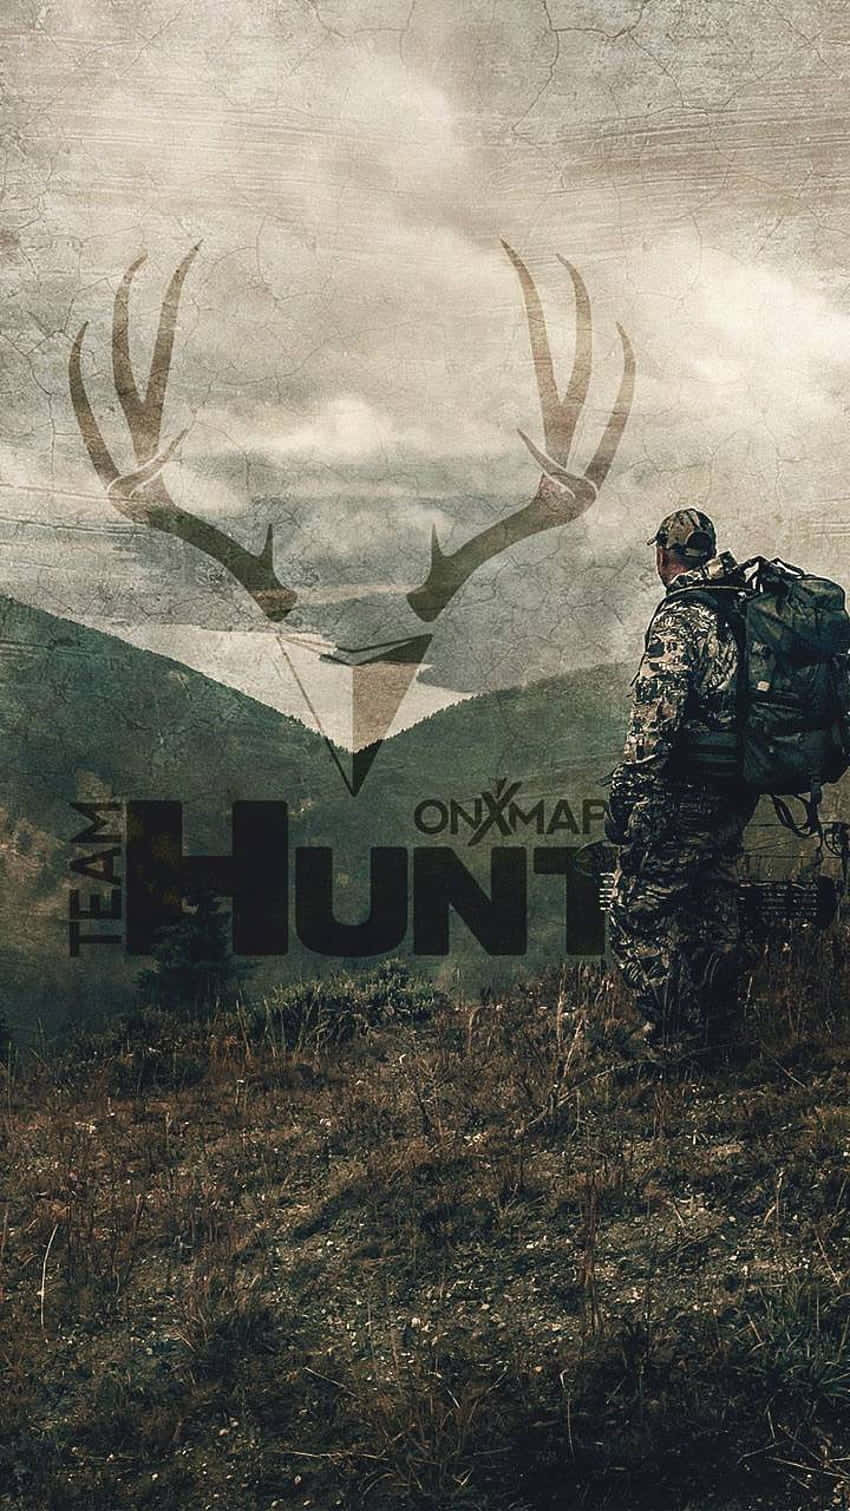 Get the competitive edge in hunting with our top-of-the-line Hunting Phone Wallpaper